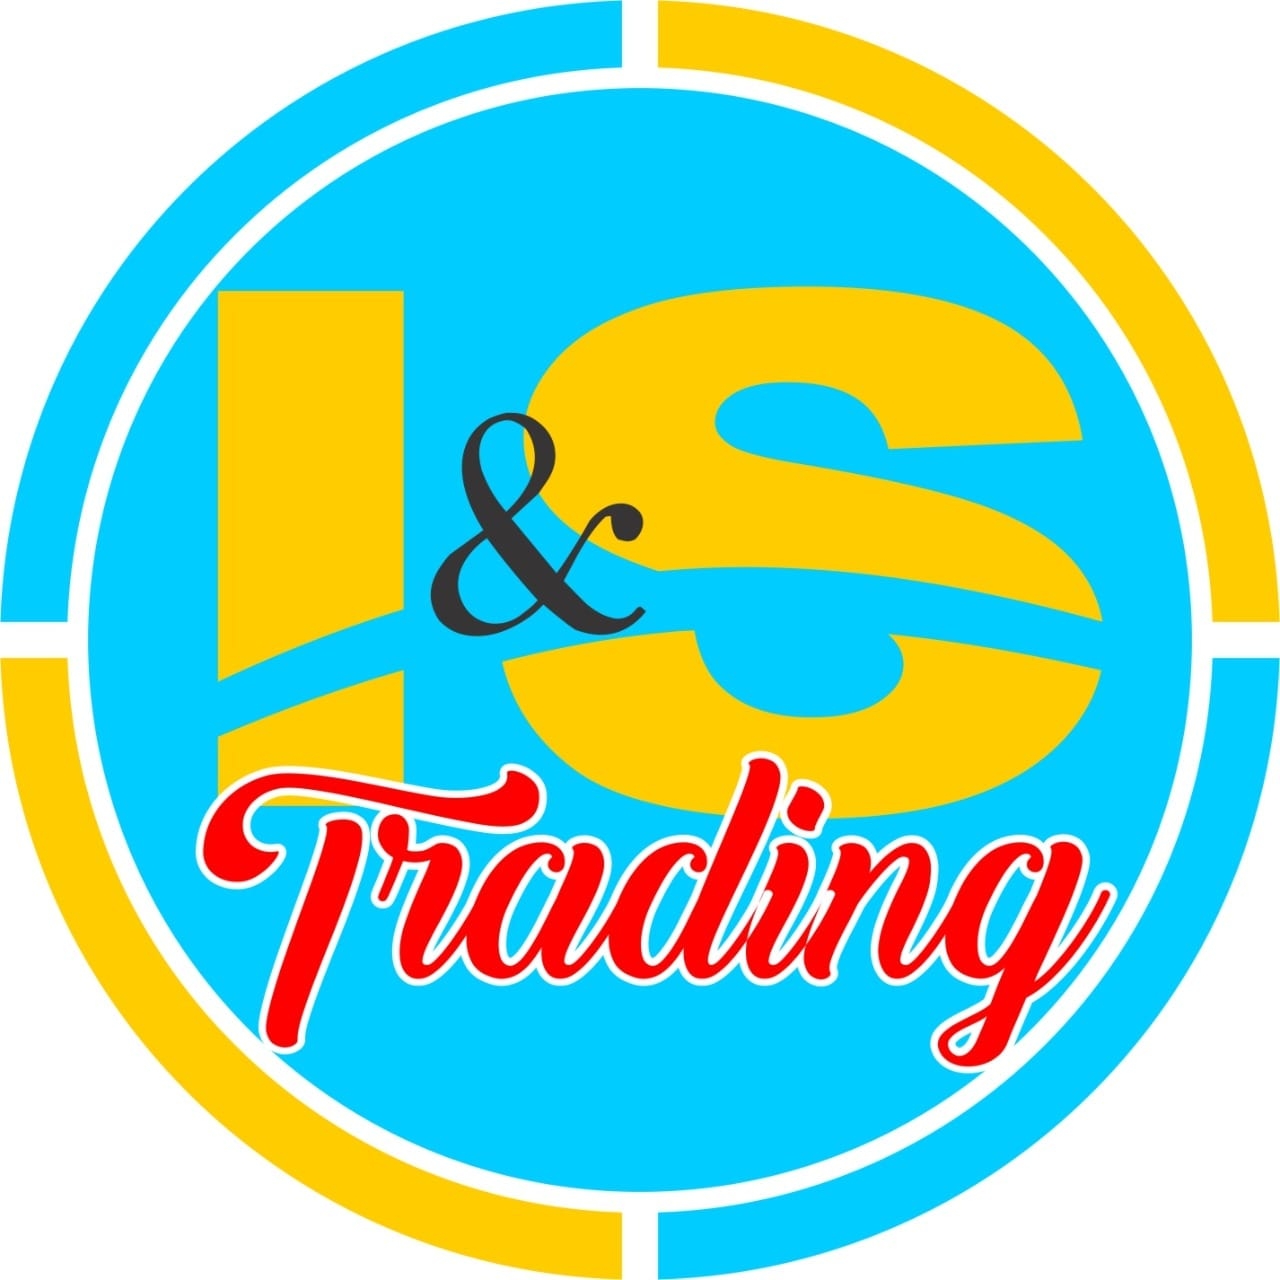 I&S Trading | Who's Who in Guyana Business Directory